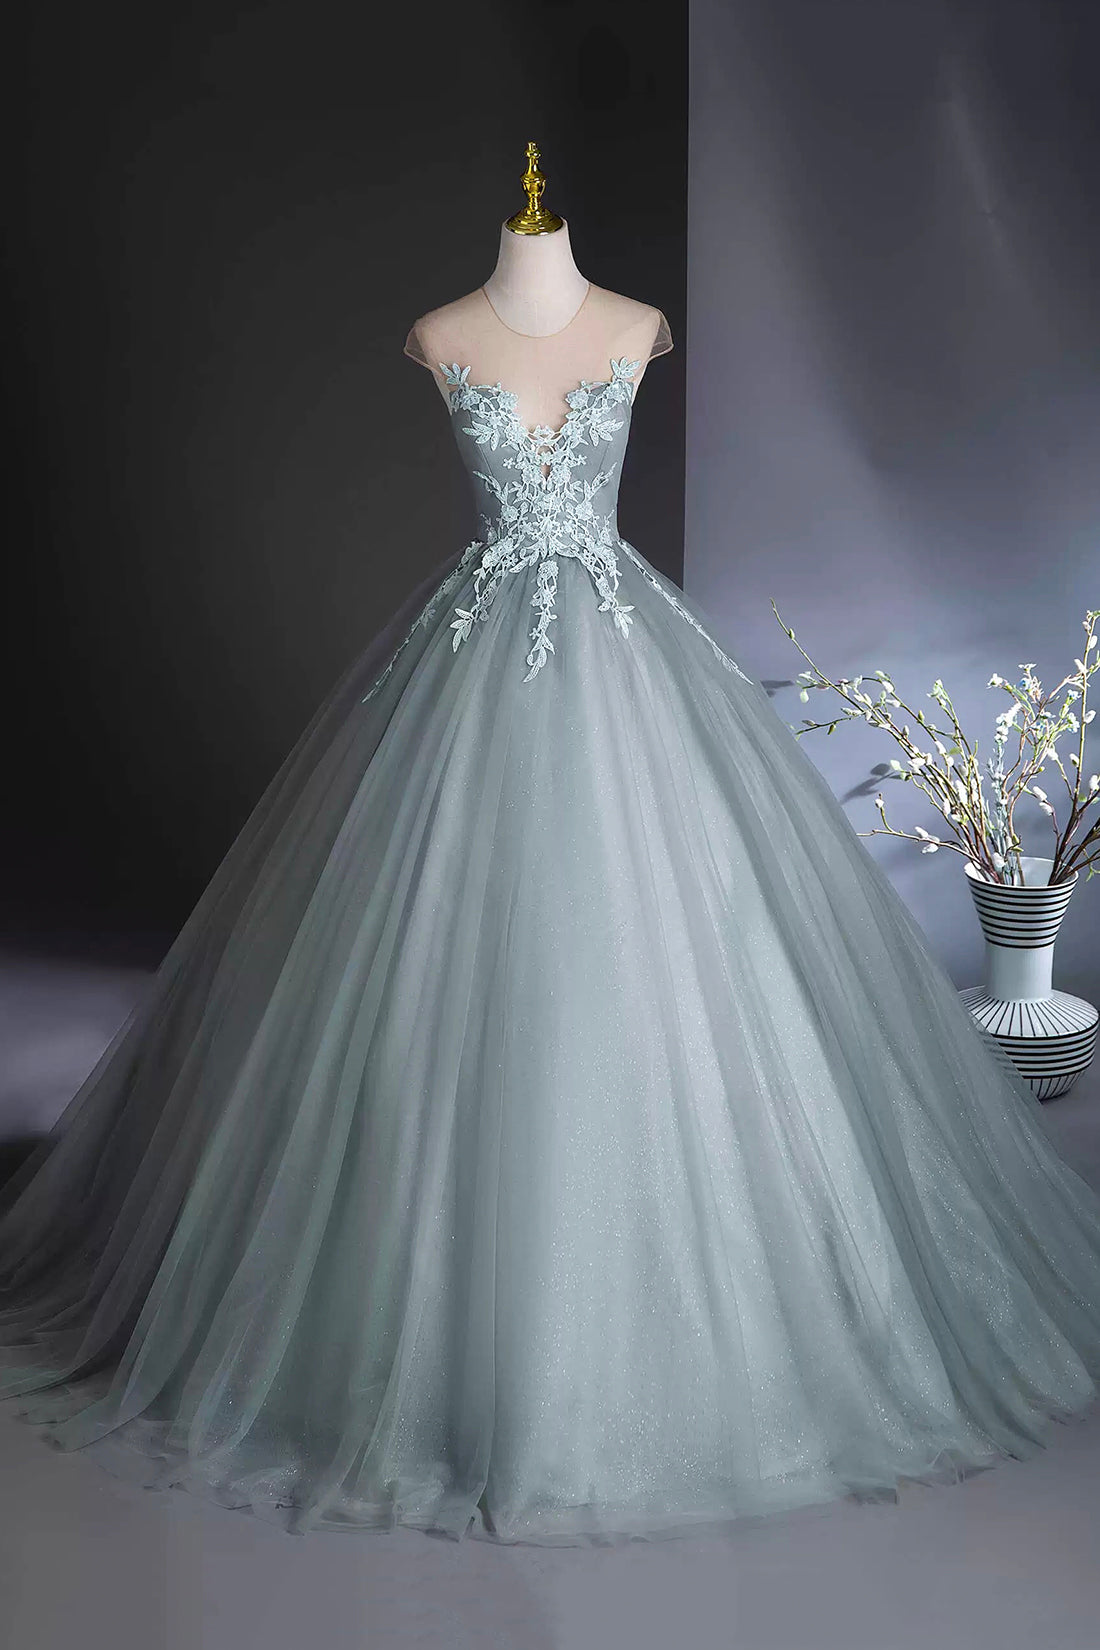 Dusty Green Tulle Floor Length Prom Dress with Lace, Elegant A-Line Formal Evening Dress